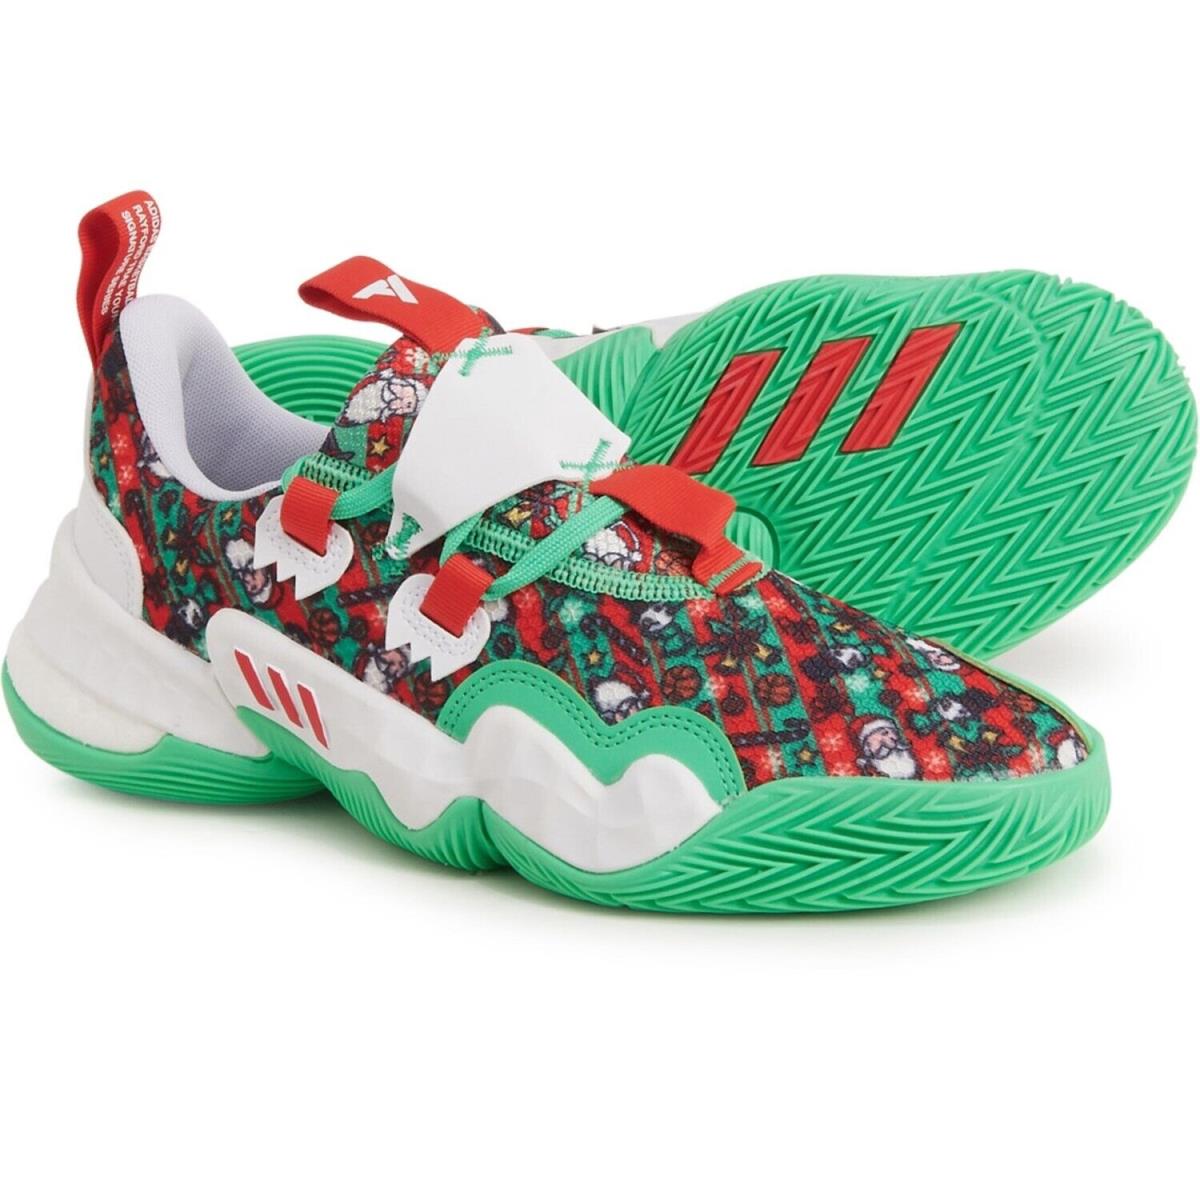 Adidas Trae Young 1 Shoes Men Sz 6 / Women Sz 7 Green Red White Christmas GY0305 - Multicolor